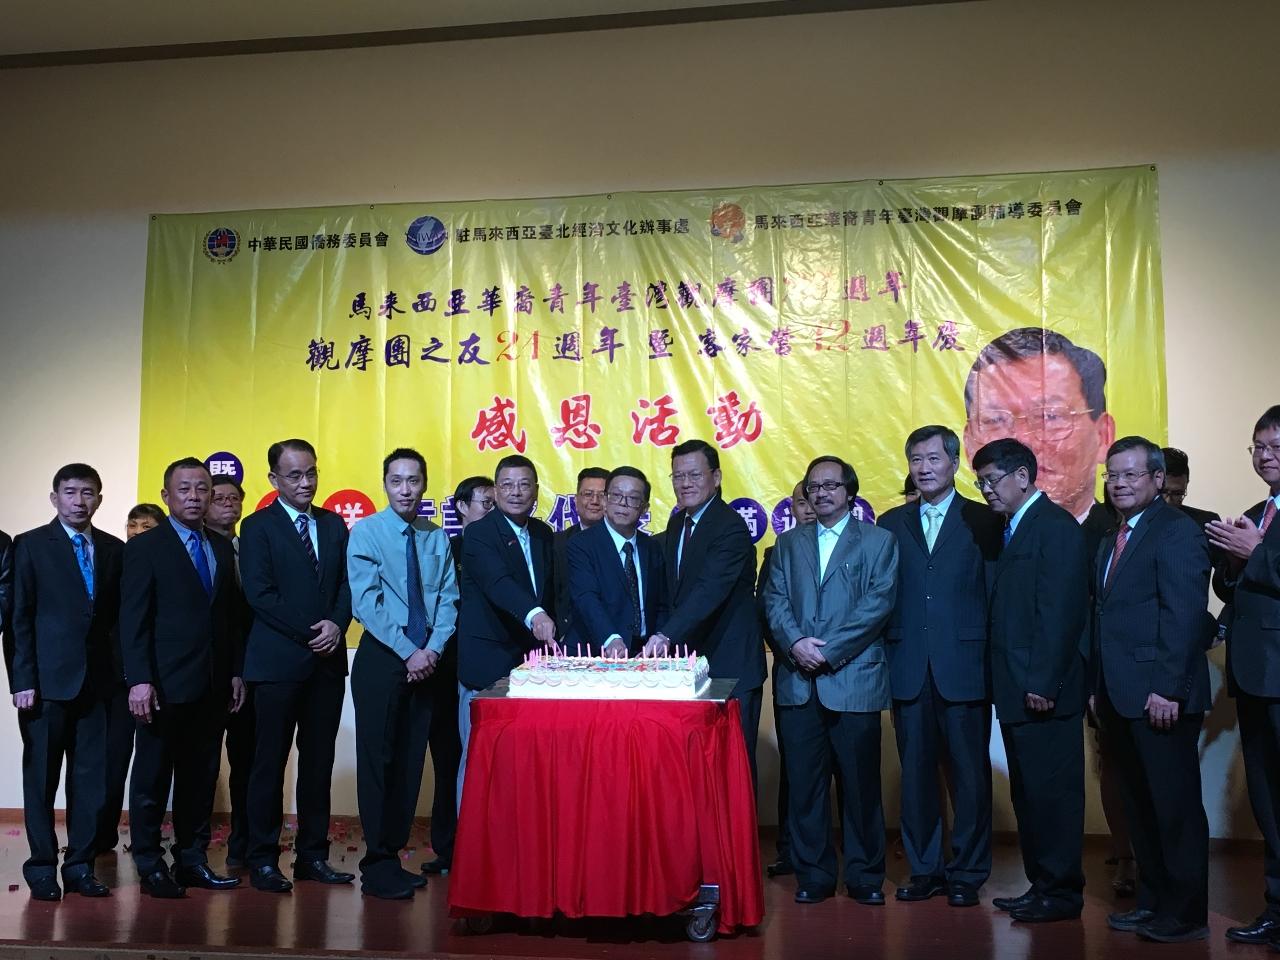 Representative Chang, James Chi-ping (row one, right one) attends Malaysian Youth Study Tour to Taiwan (Guan Moo Tuan) 29th Anniversary and take photograph with VIP.
